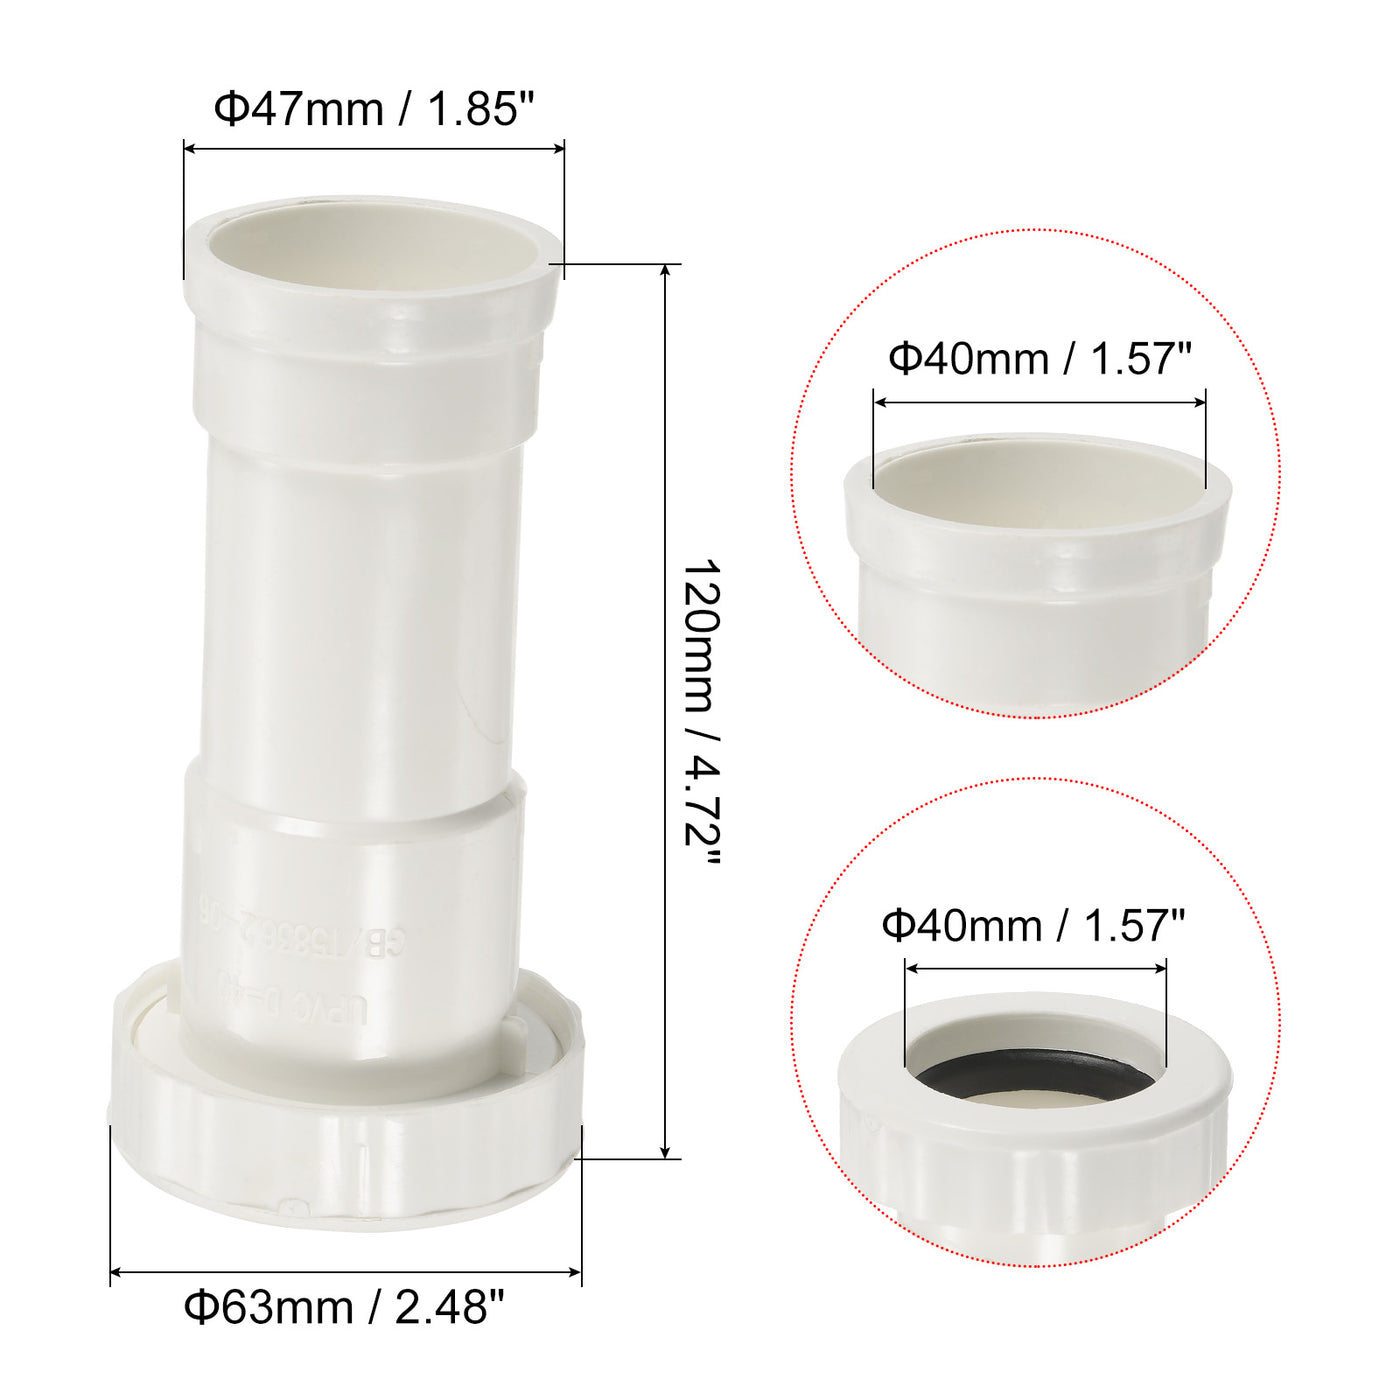 Harfington 1.57" ID x 4.7" L Flanged Tailpiece, PVC Plastic Direct Connect Tube for Kitchen Bathroom Tubular Drain Pipe Connections, White